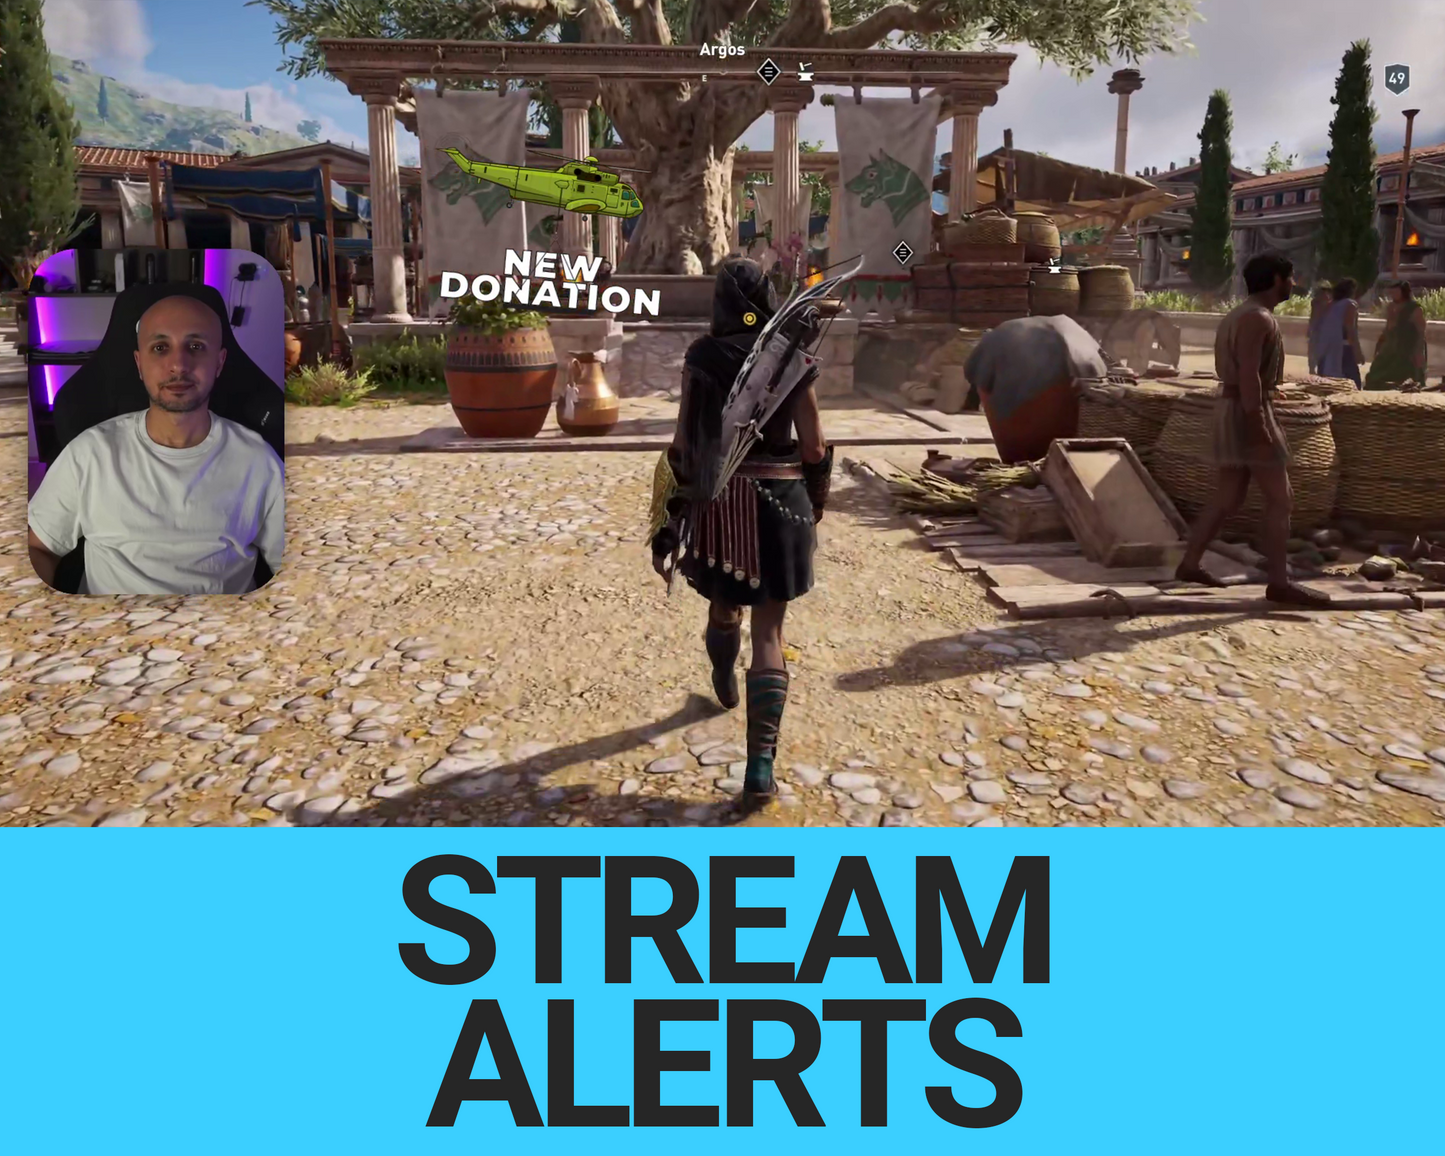 Helicopter Stream Alerts